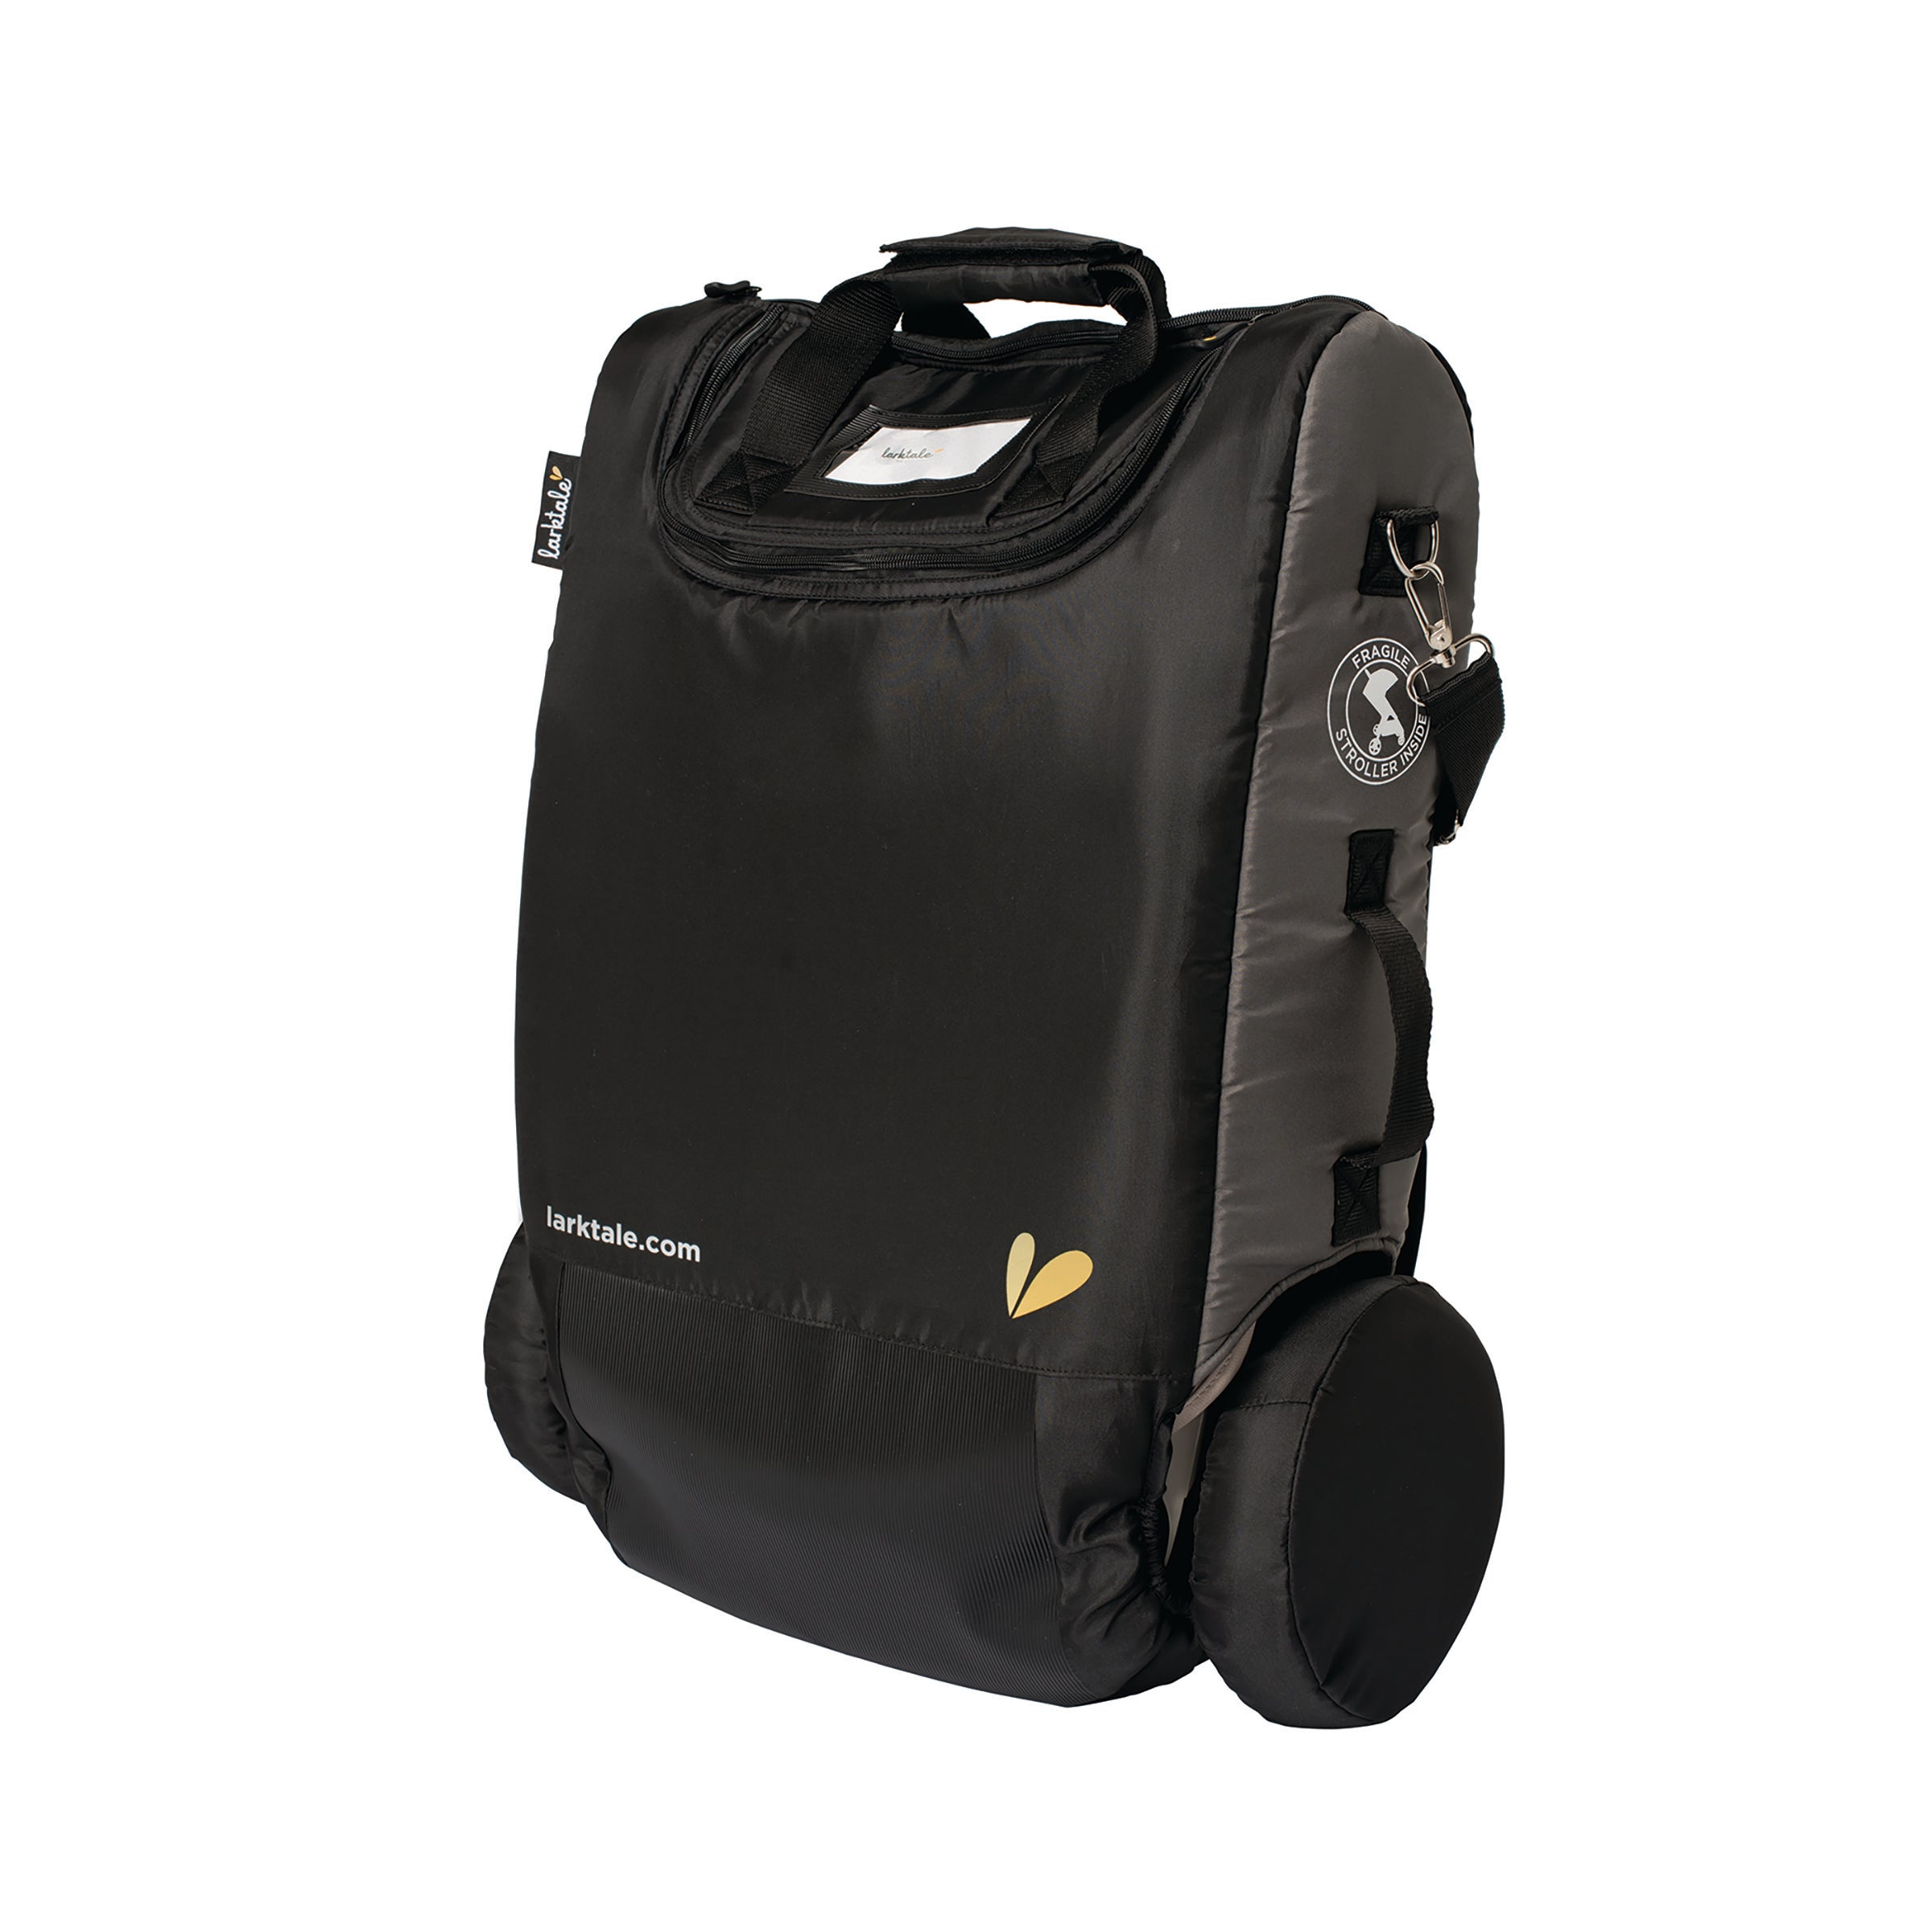 stroller travel bag with wheels